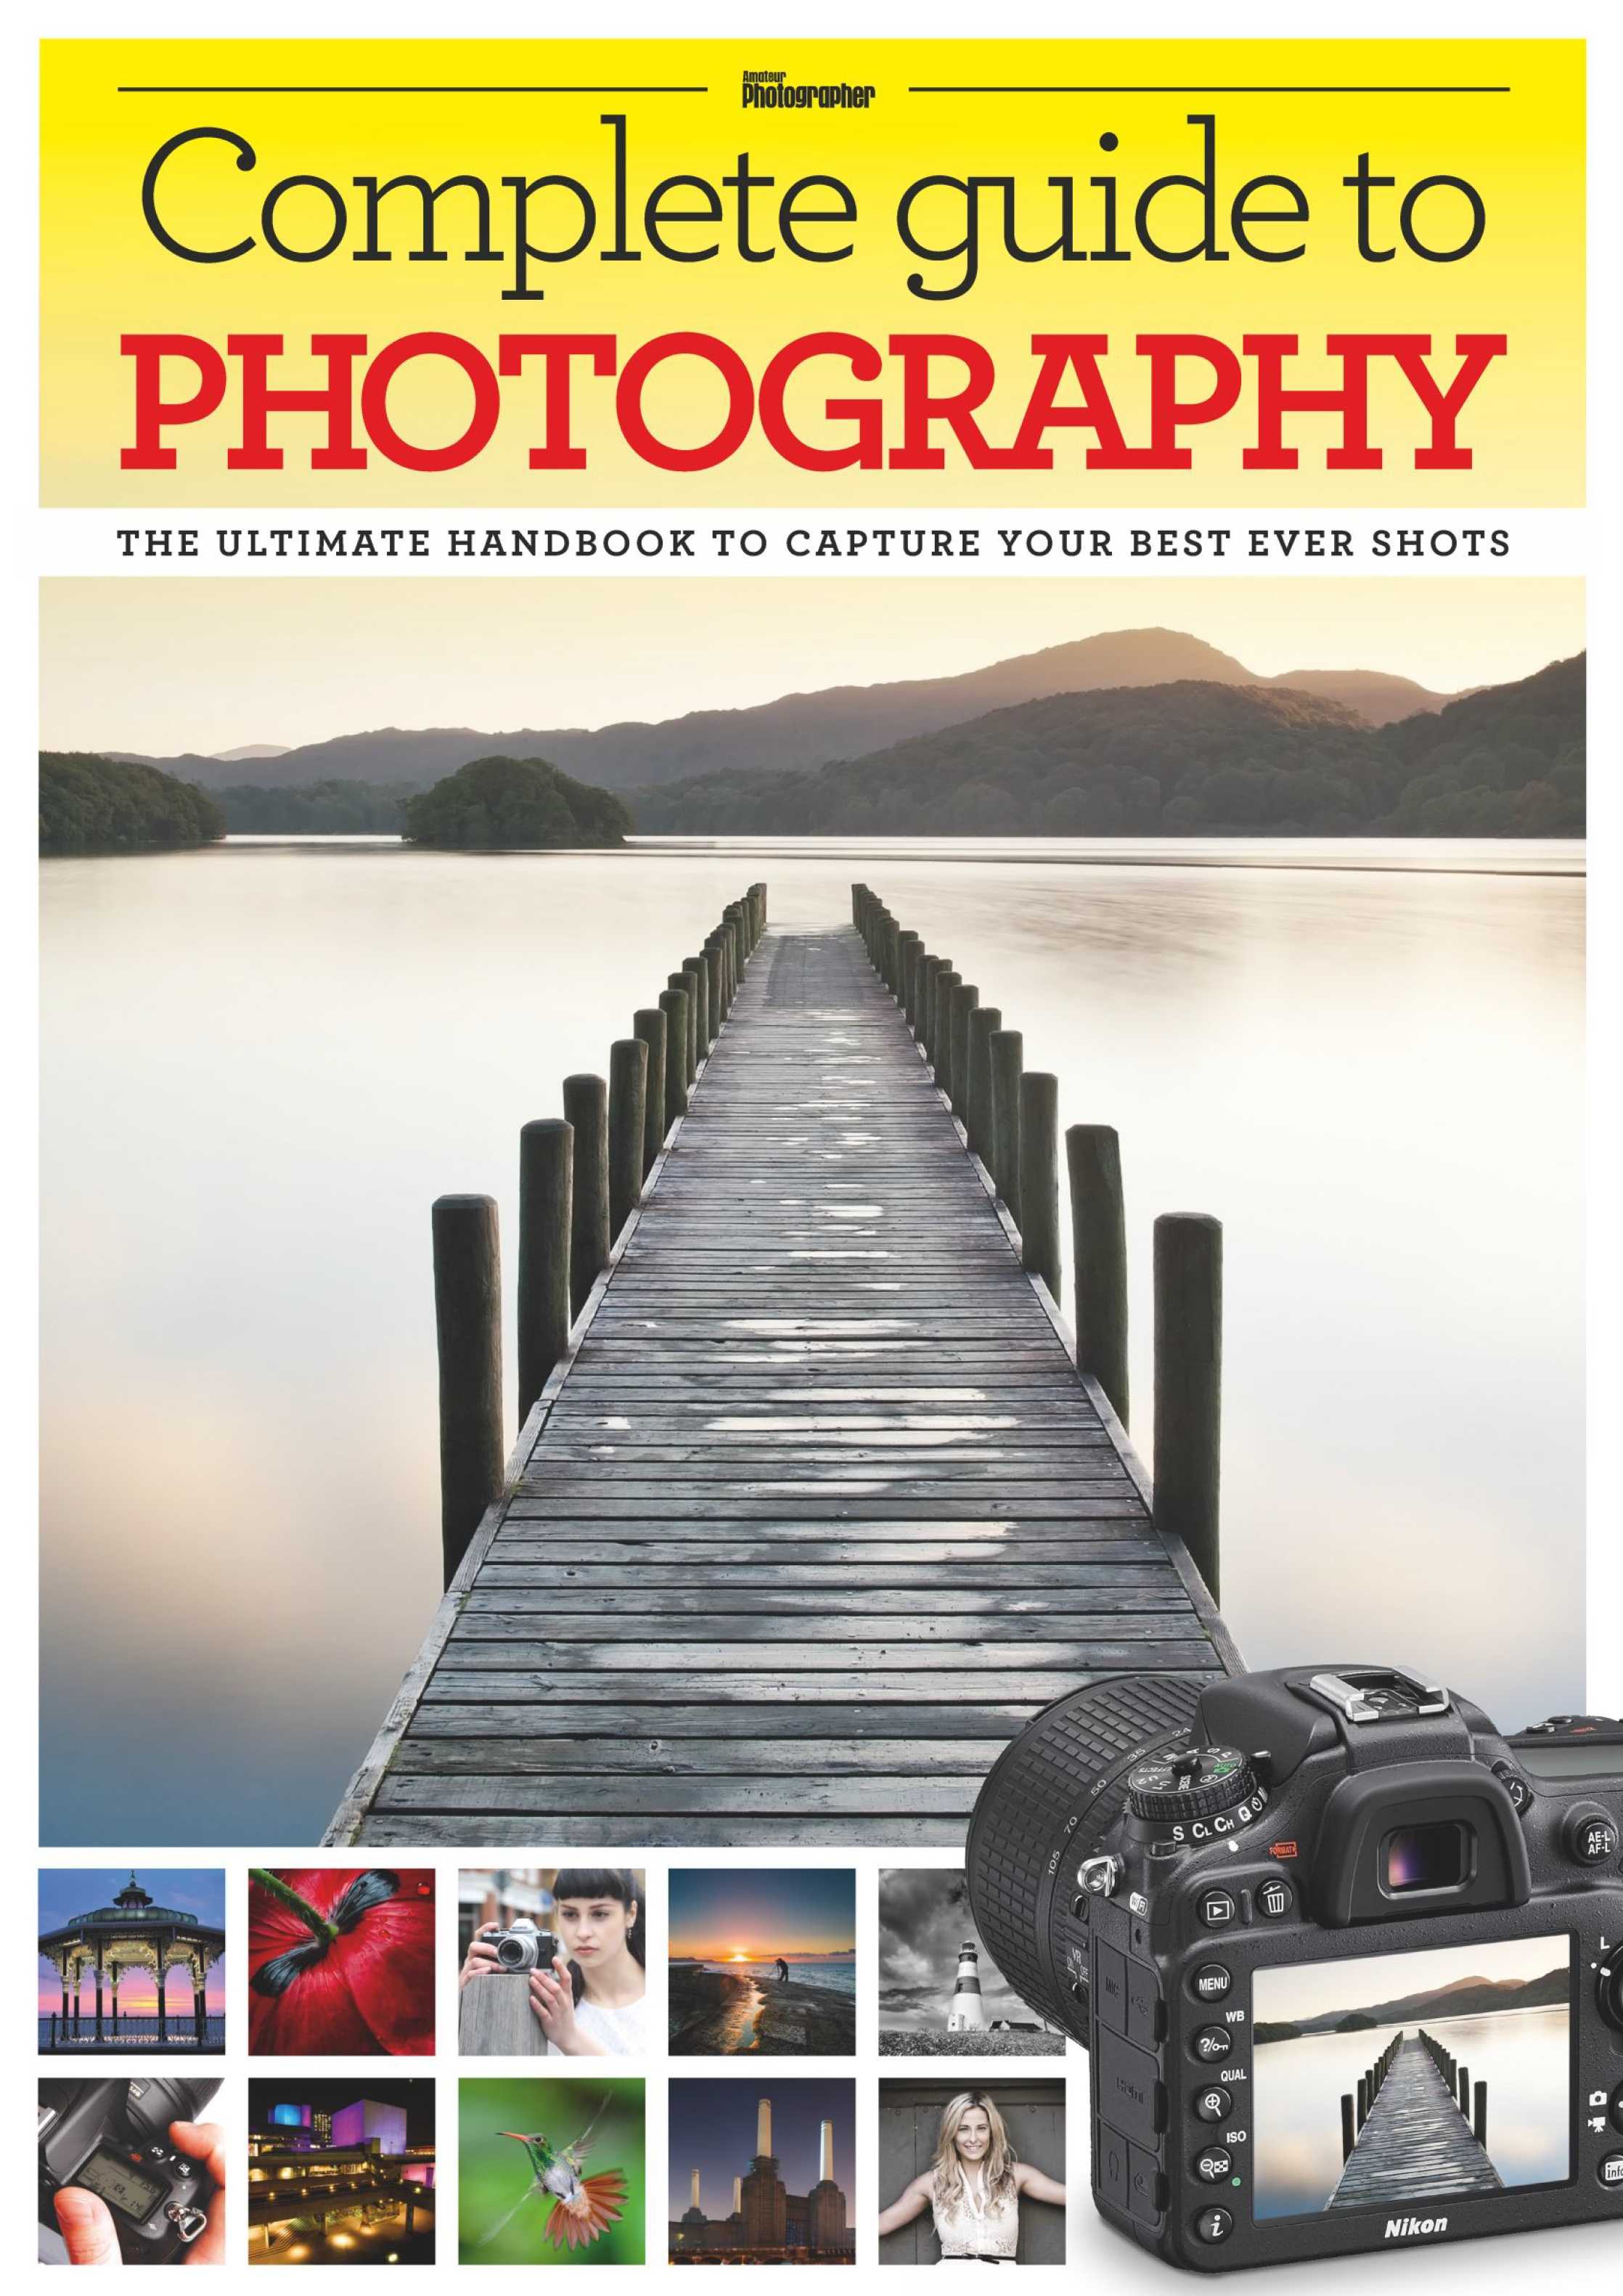 Amateur Photographer – Complete guide to Photography 2015-P2P